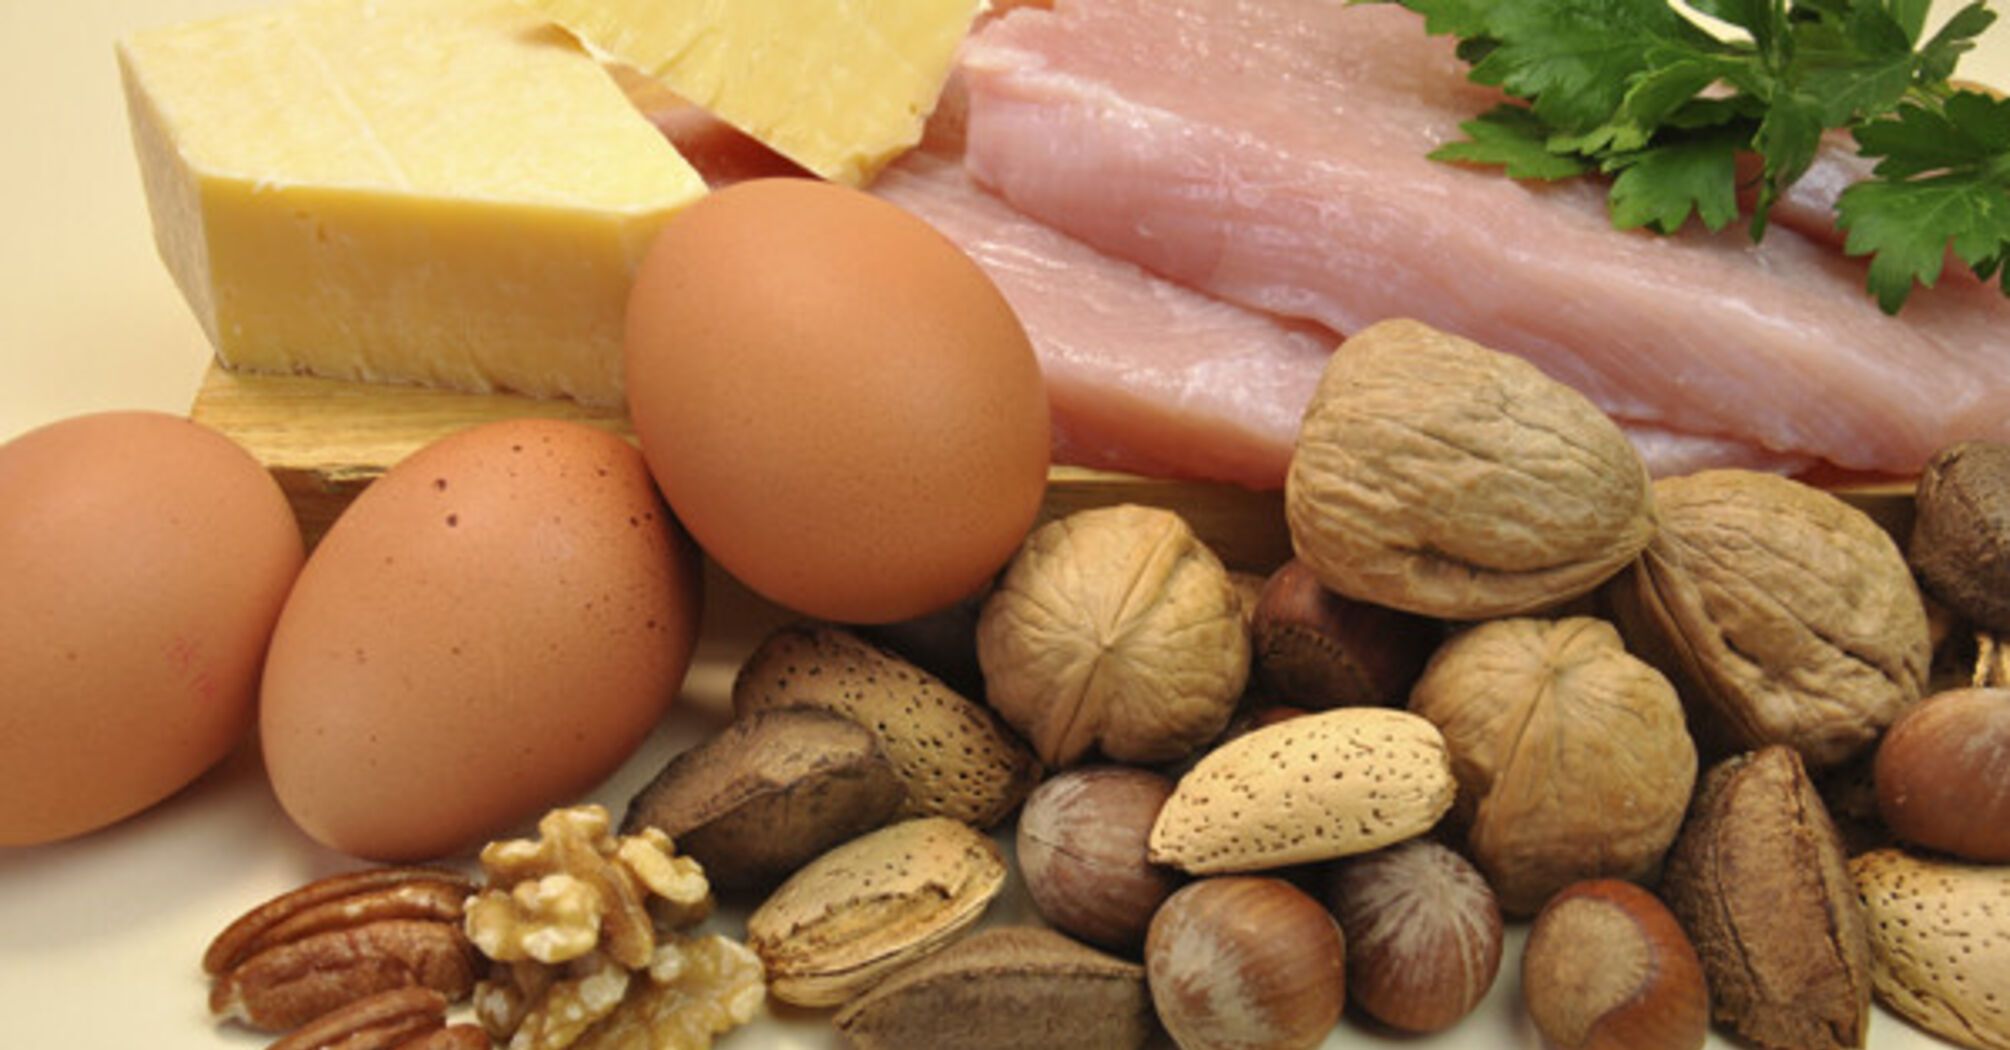 Does your body need protein?